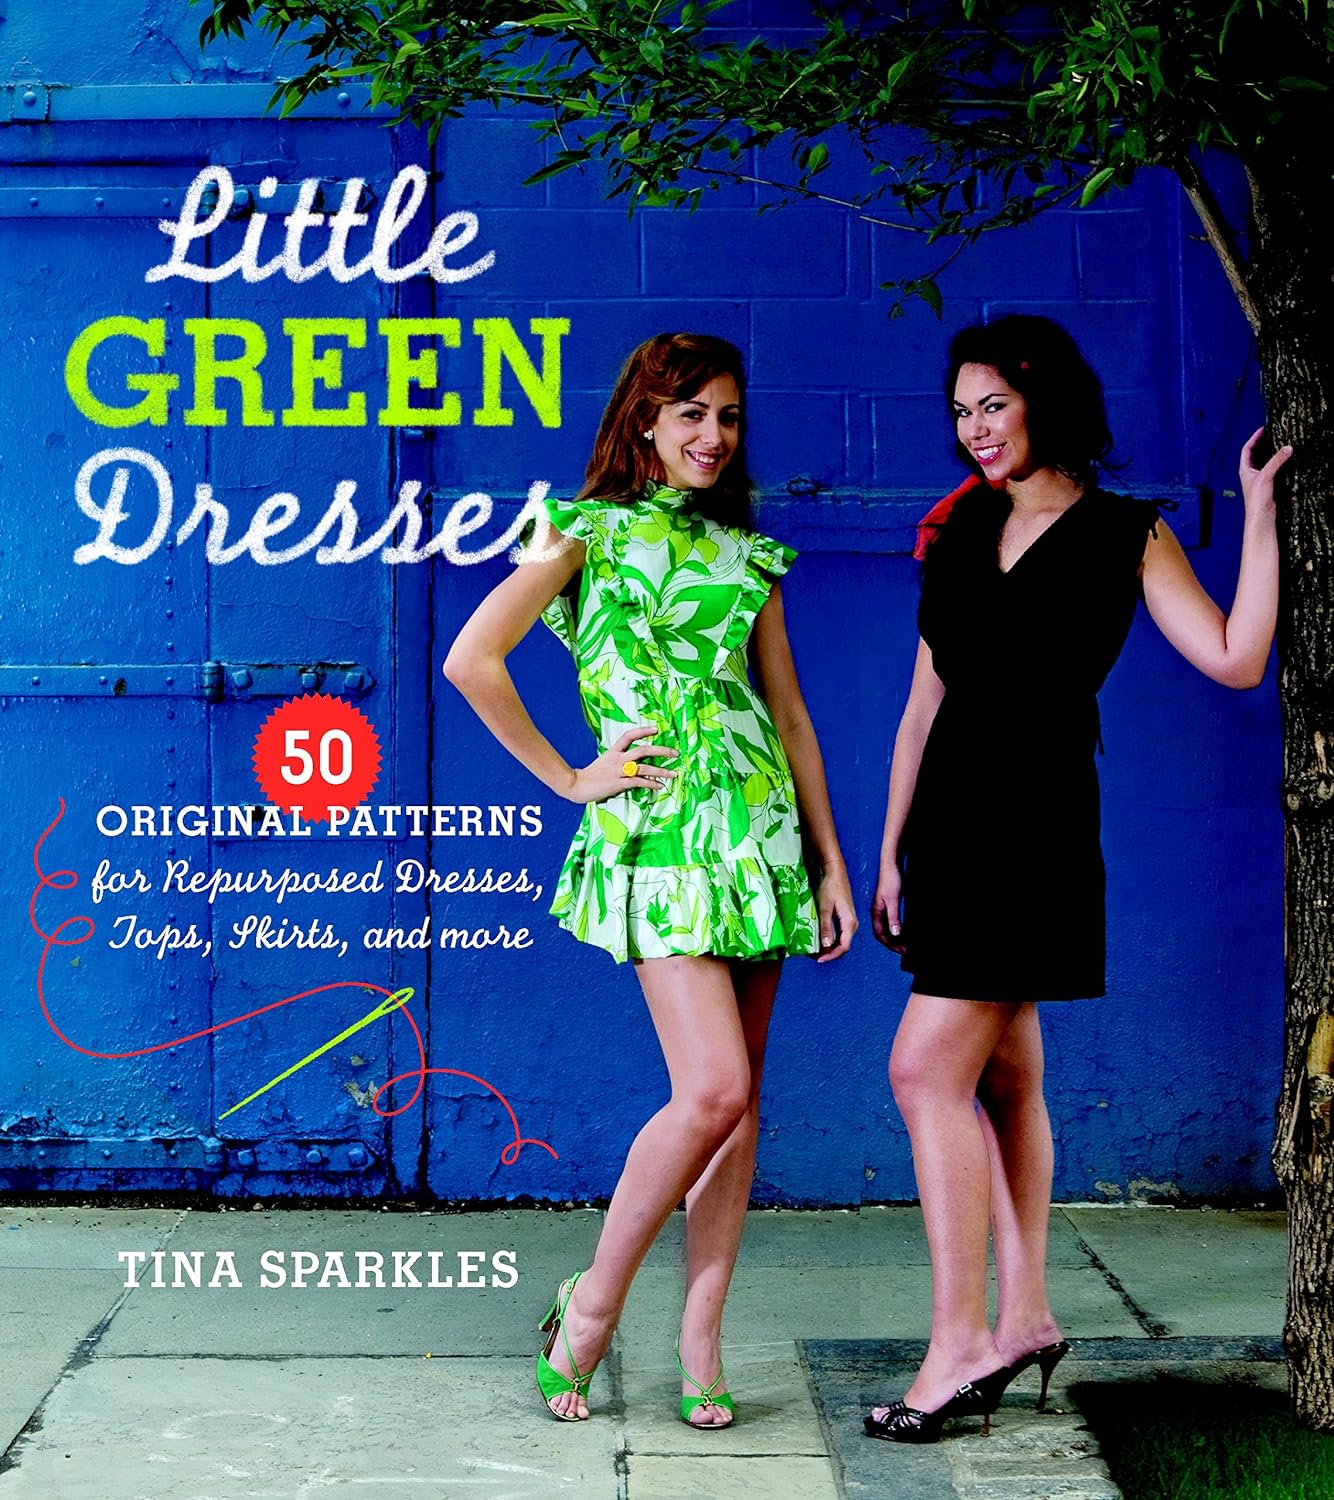 Little Green Dresses 50 Original Patterns for Repurposed Dresses, Tops, Skirts, and More